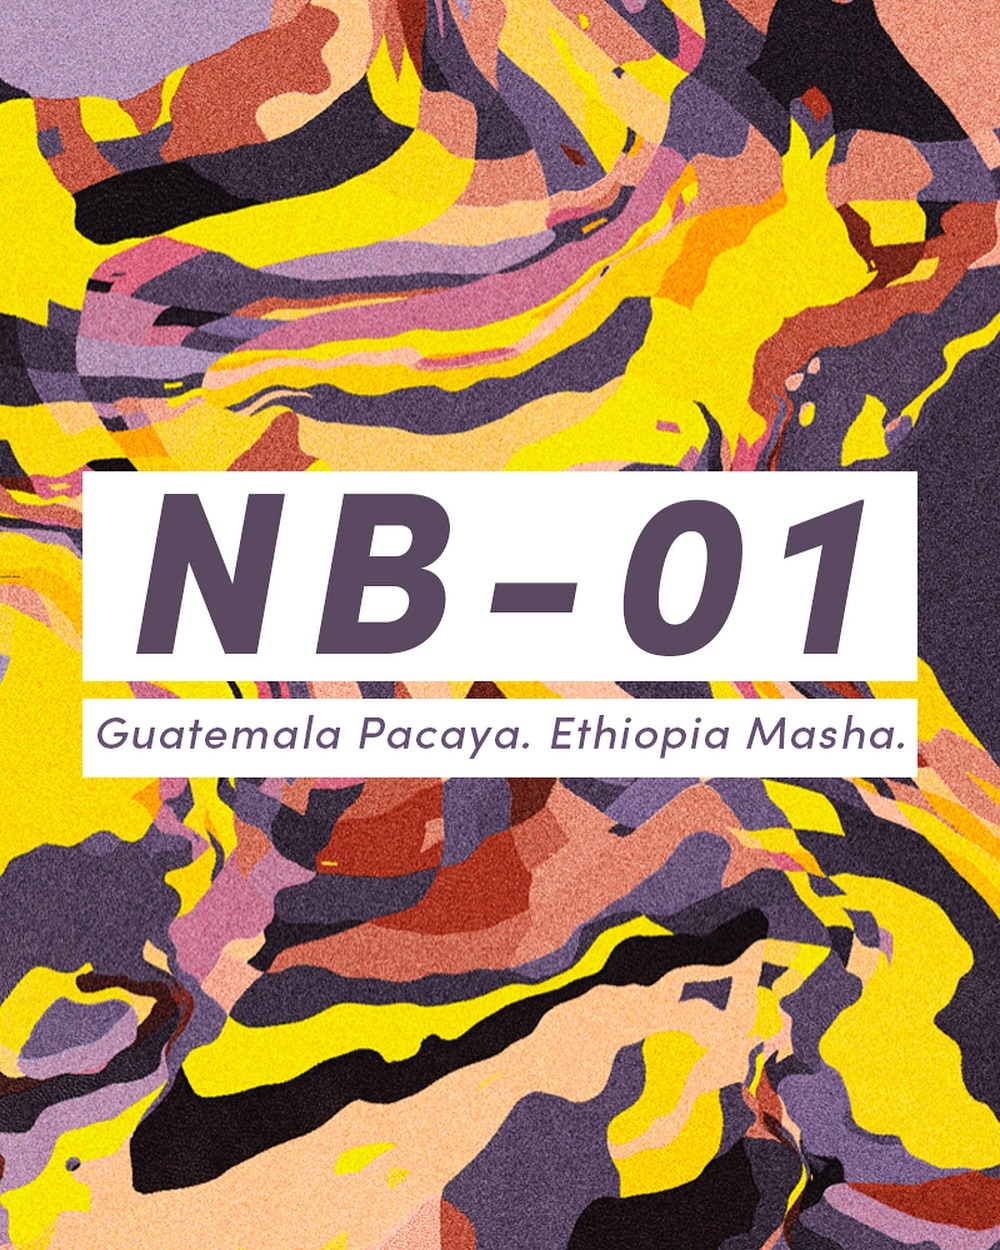 And… we are live! Introducing our first drop, NB-01. A blend of Guatemala Pacaya and Ethiopia Masha, roasted to a Medium